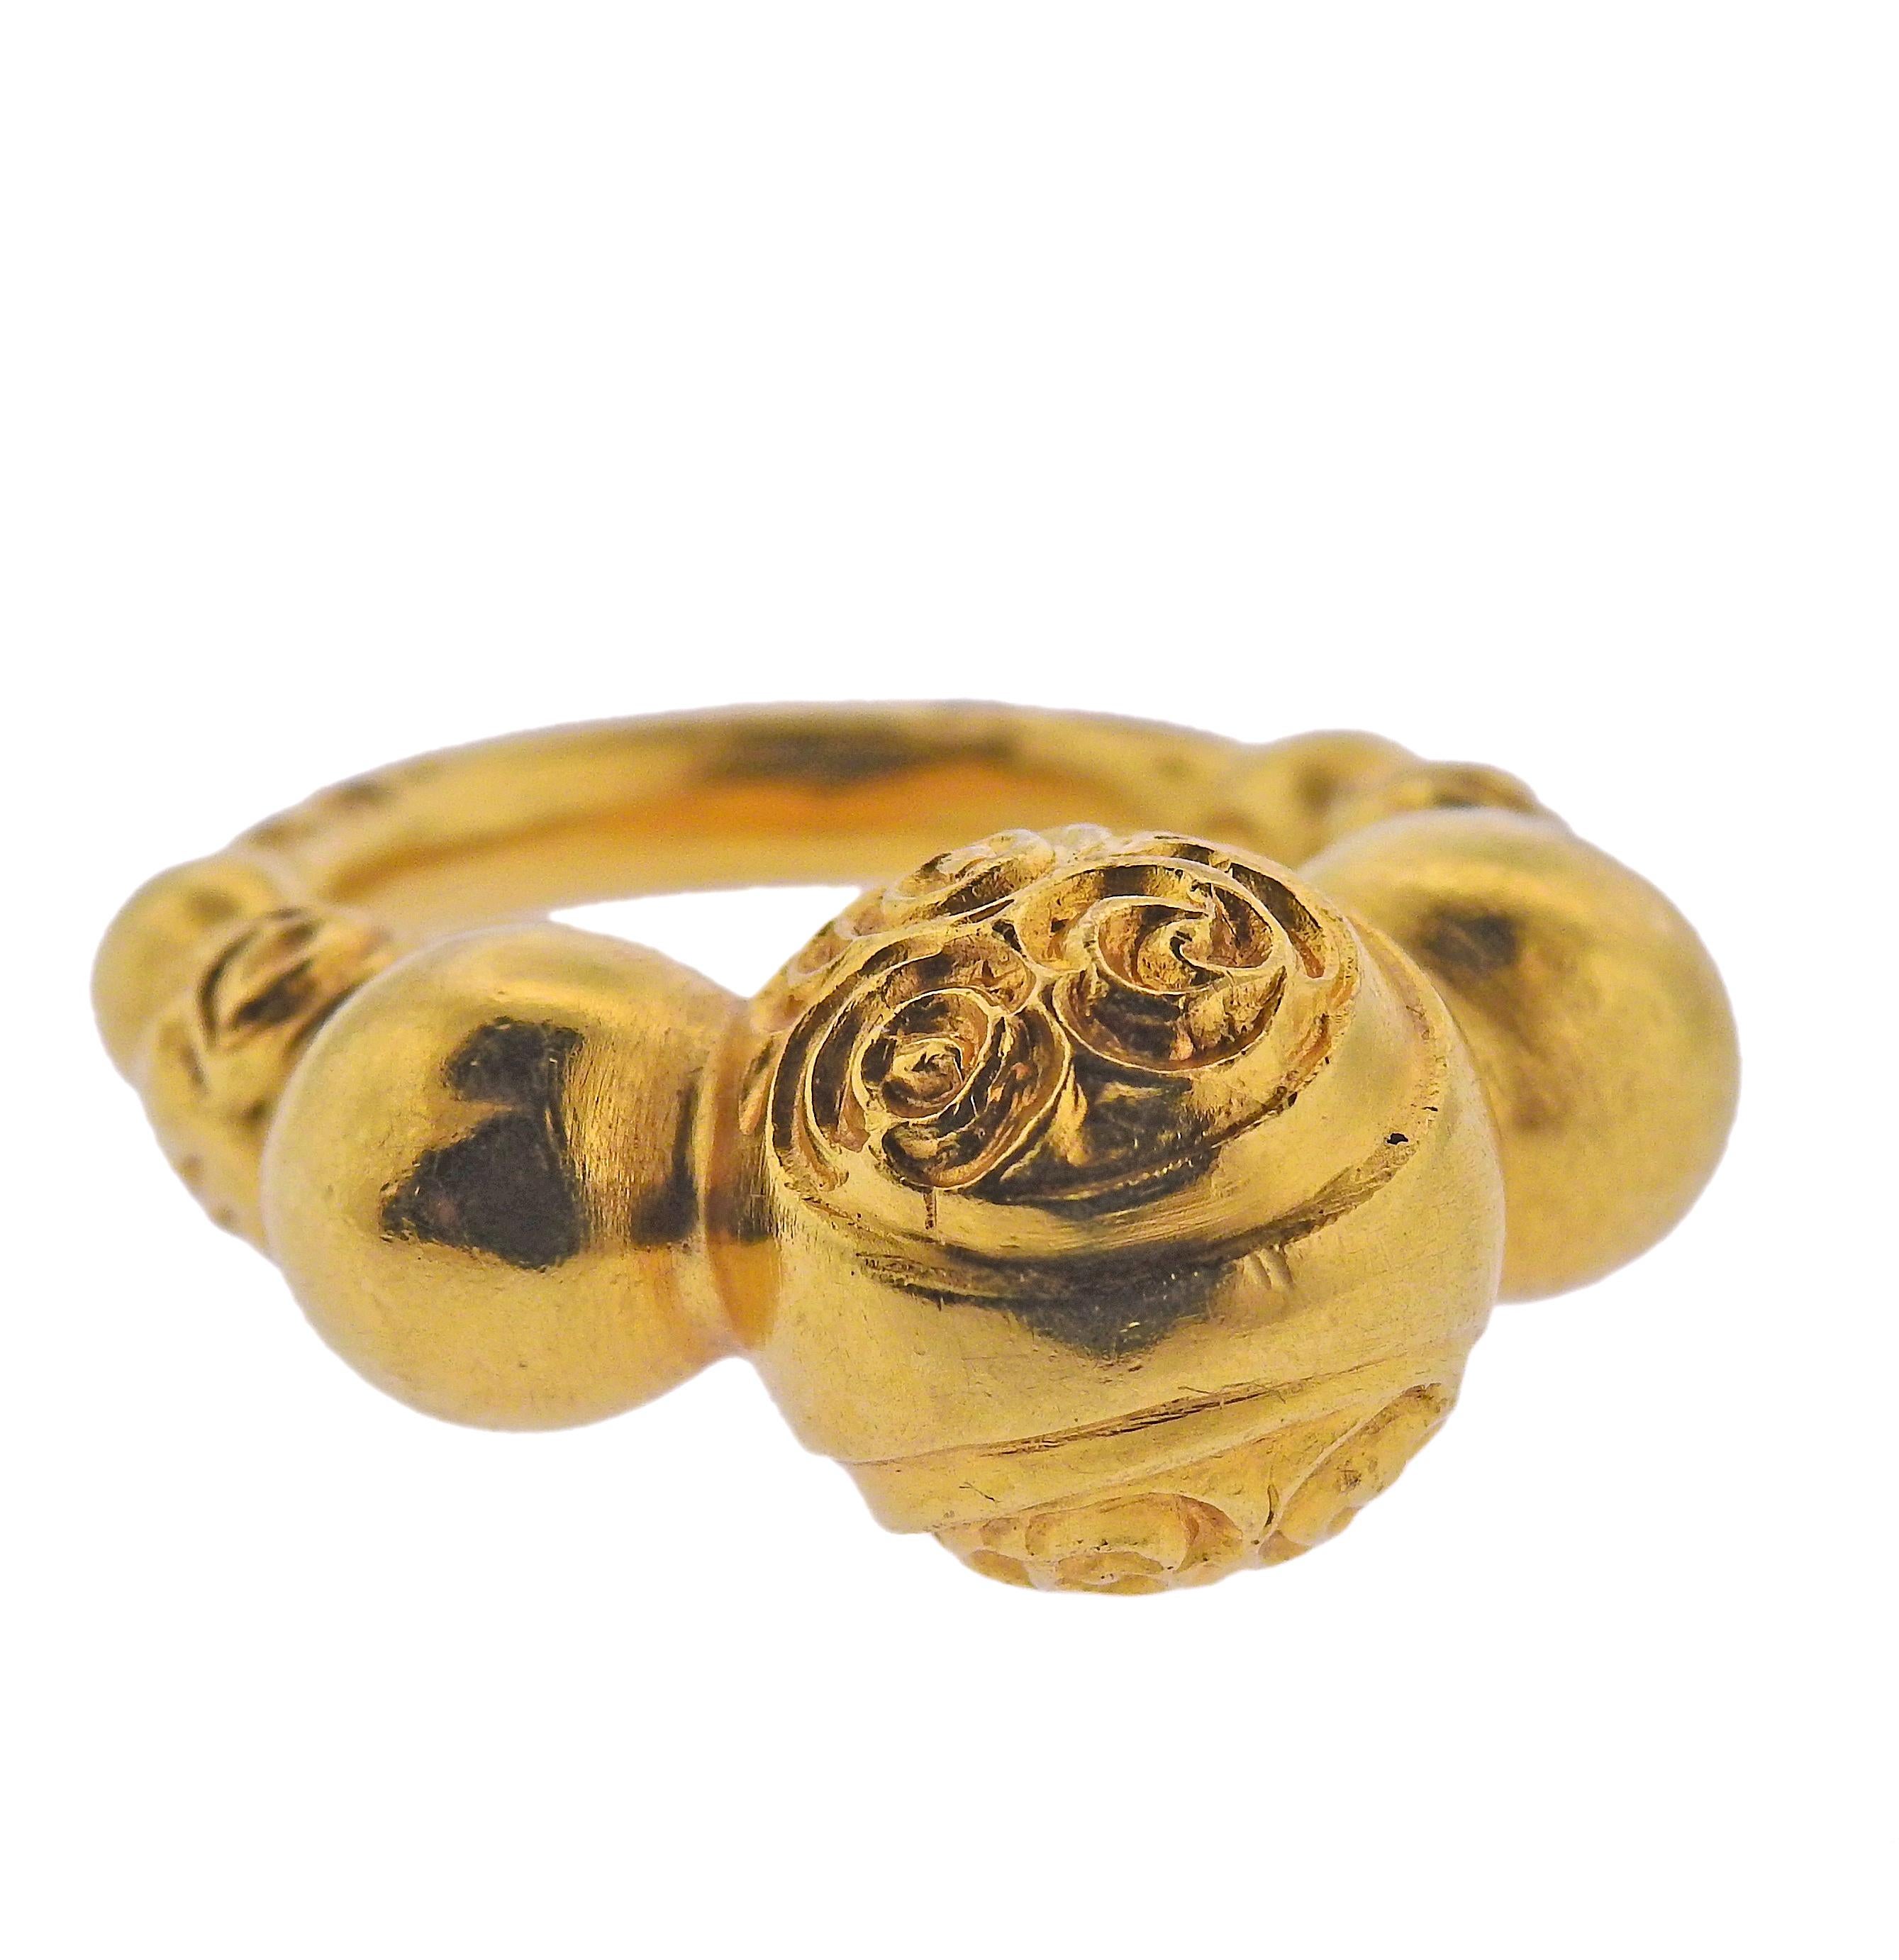 18k yellow gold ring by Ilias Lalaounis of Greece. Ring is a size 6, center ball is 12mm in diameter. Marked with Maker's mark, Greece, 750, A21. Weight - 7.6 grams. 